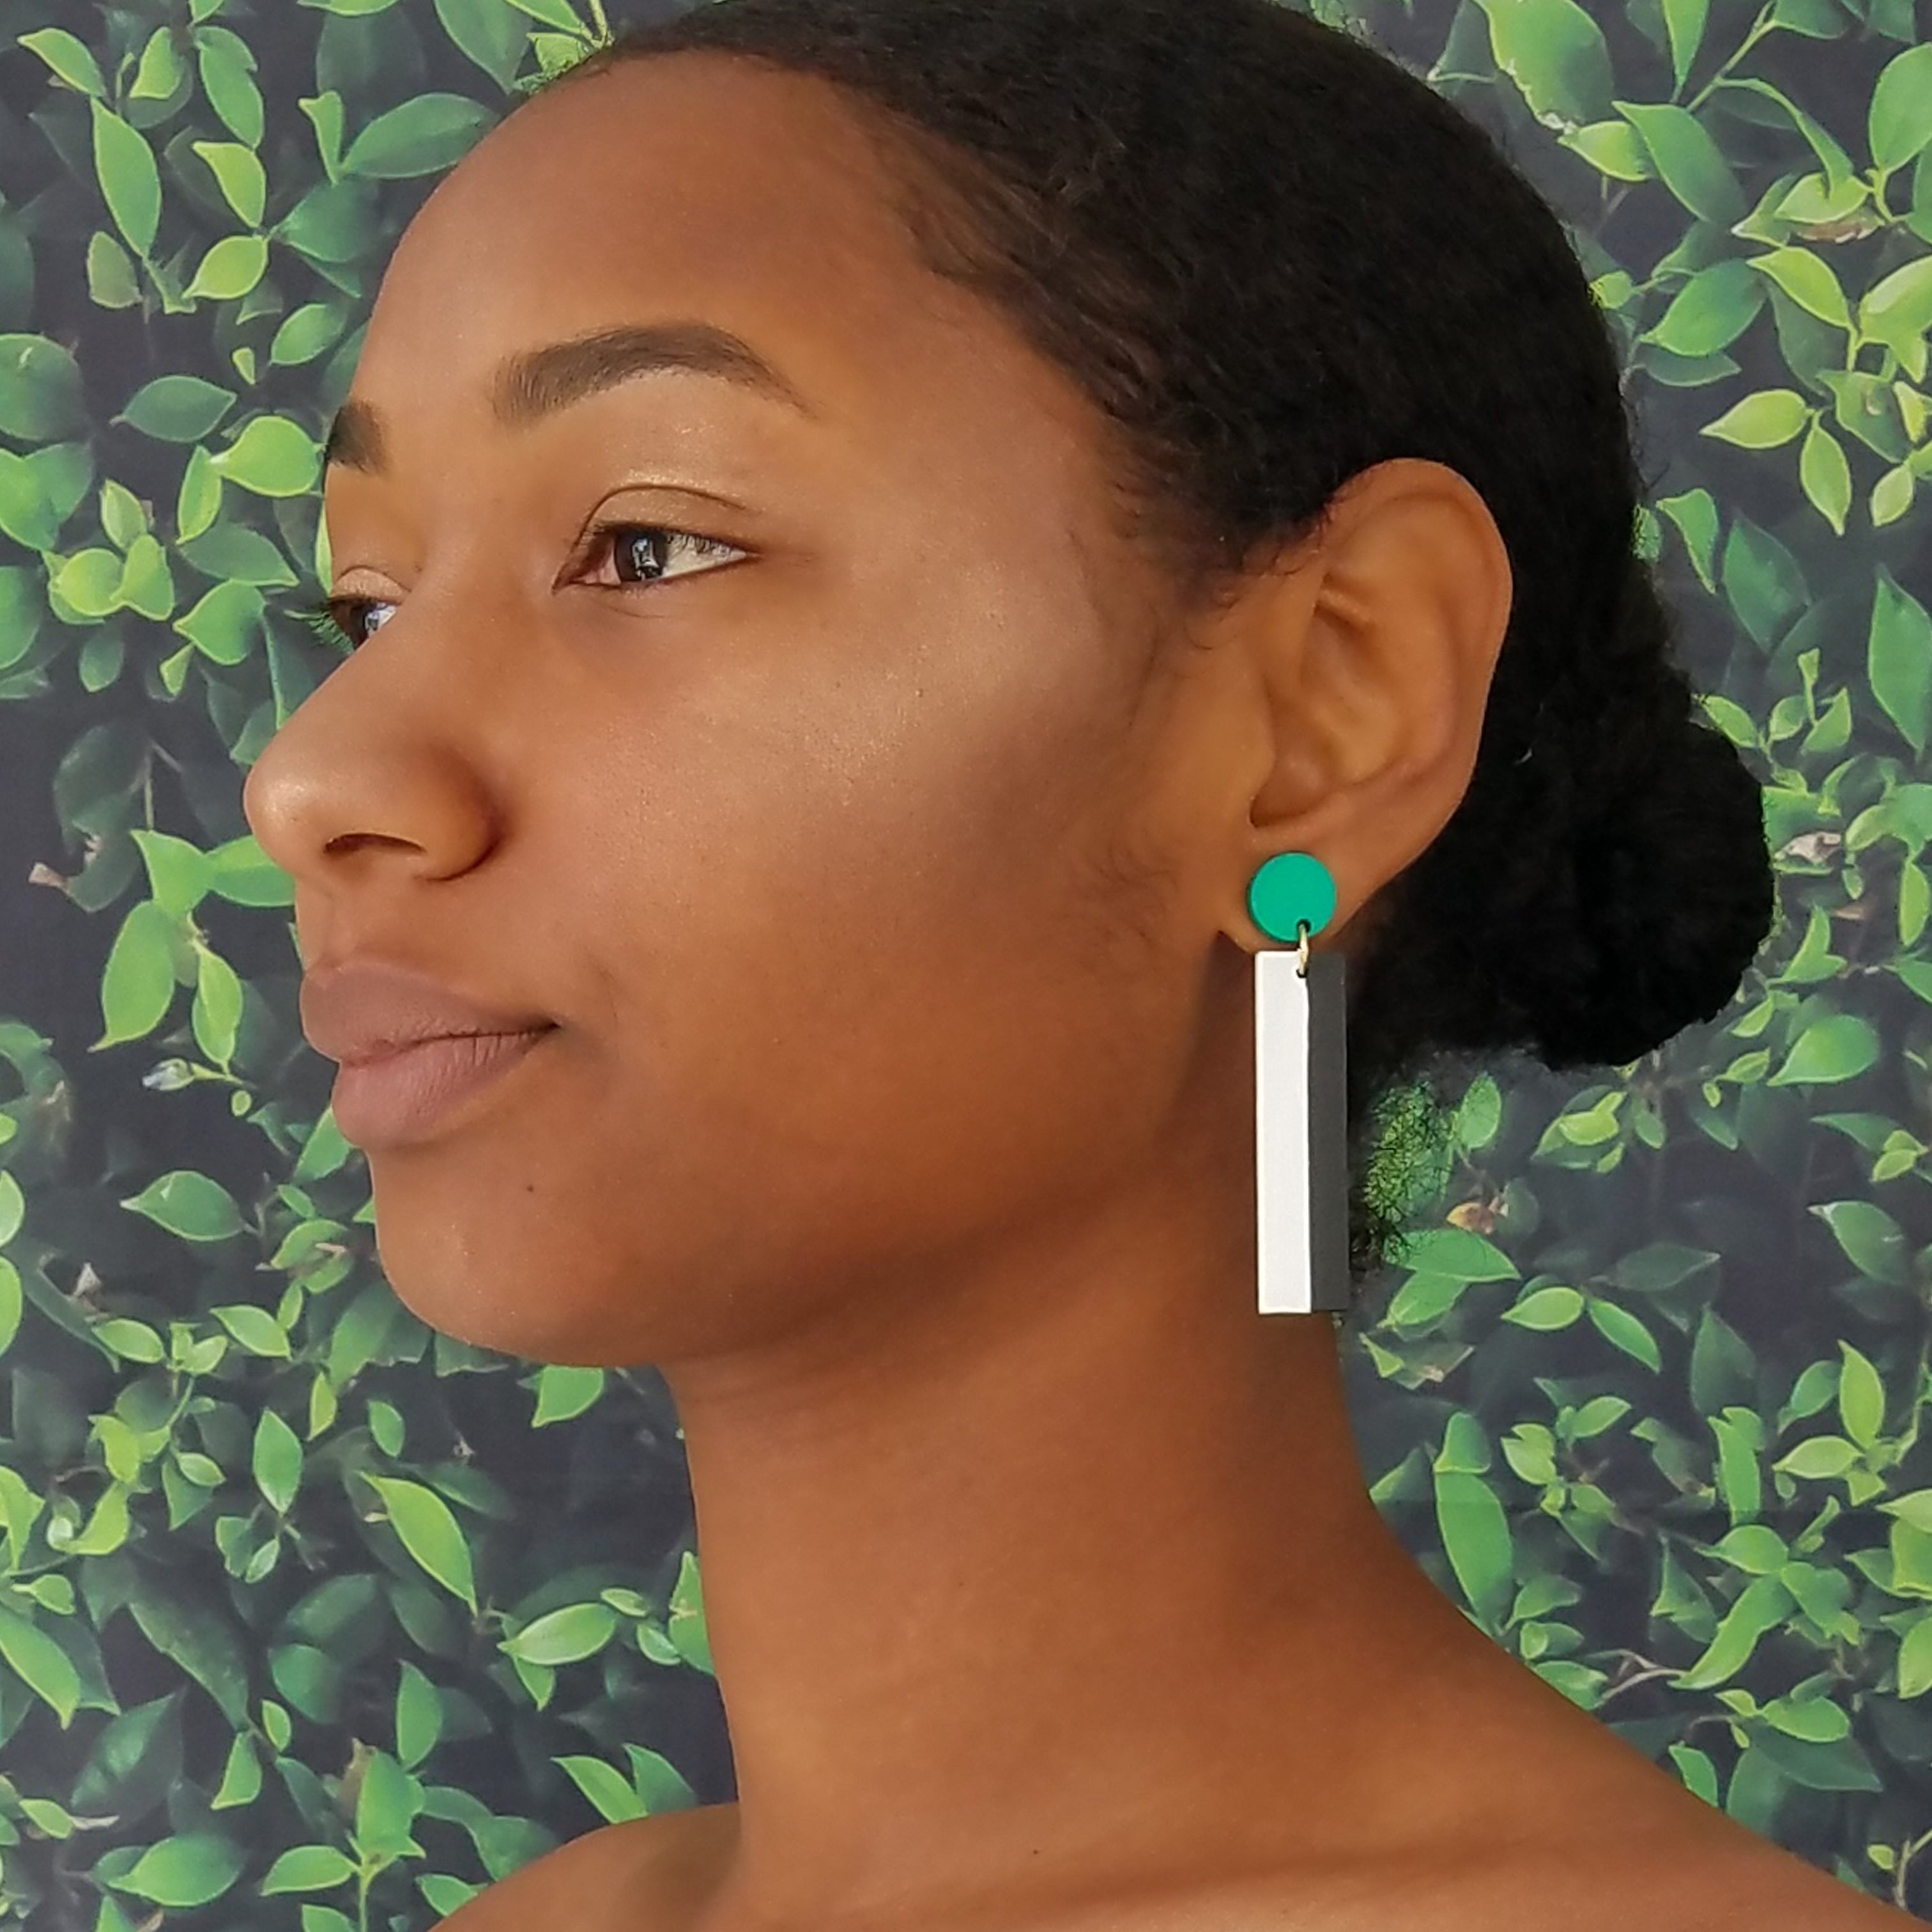 Model wearing geometric teal, white, and black color blocked statement earrings by the brand SCOTCHBONNET.